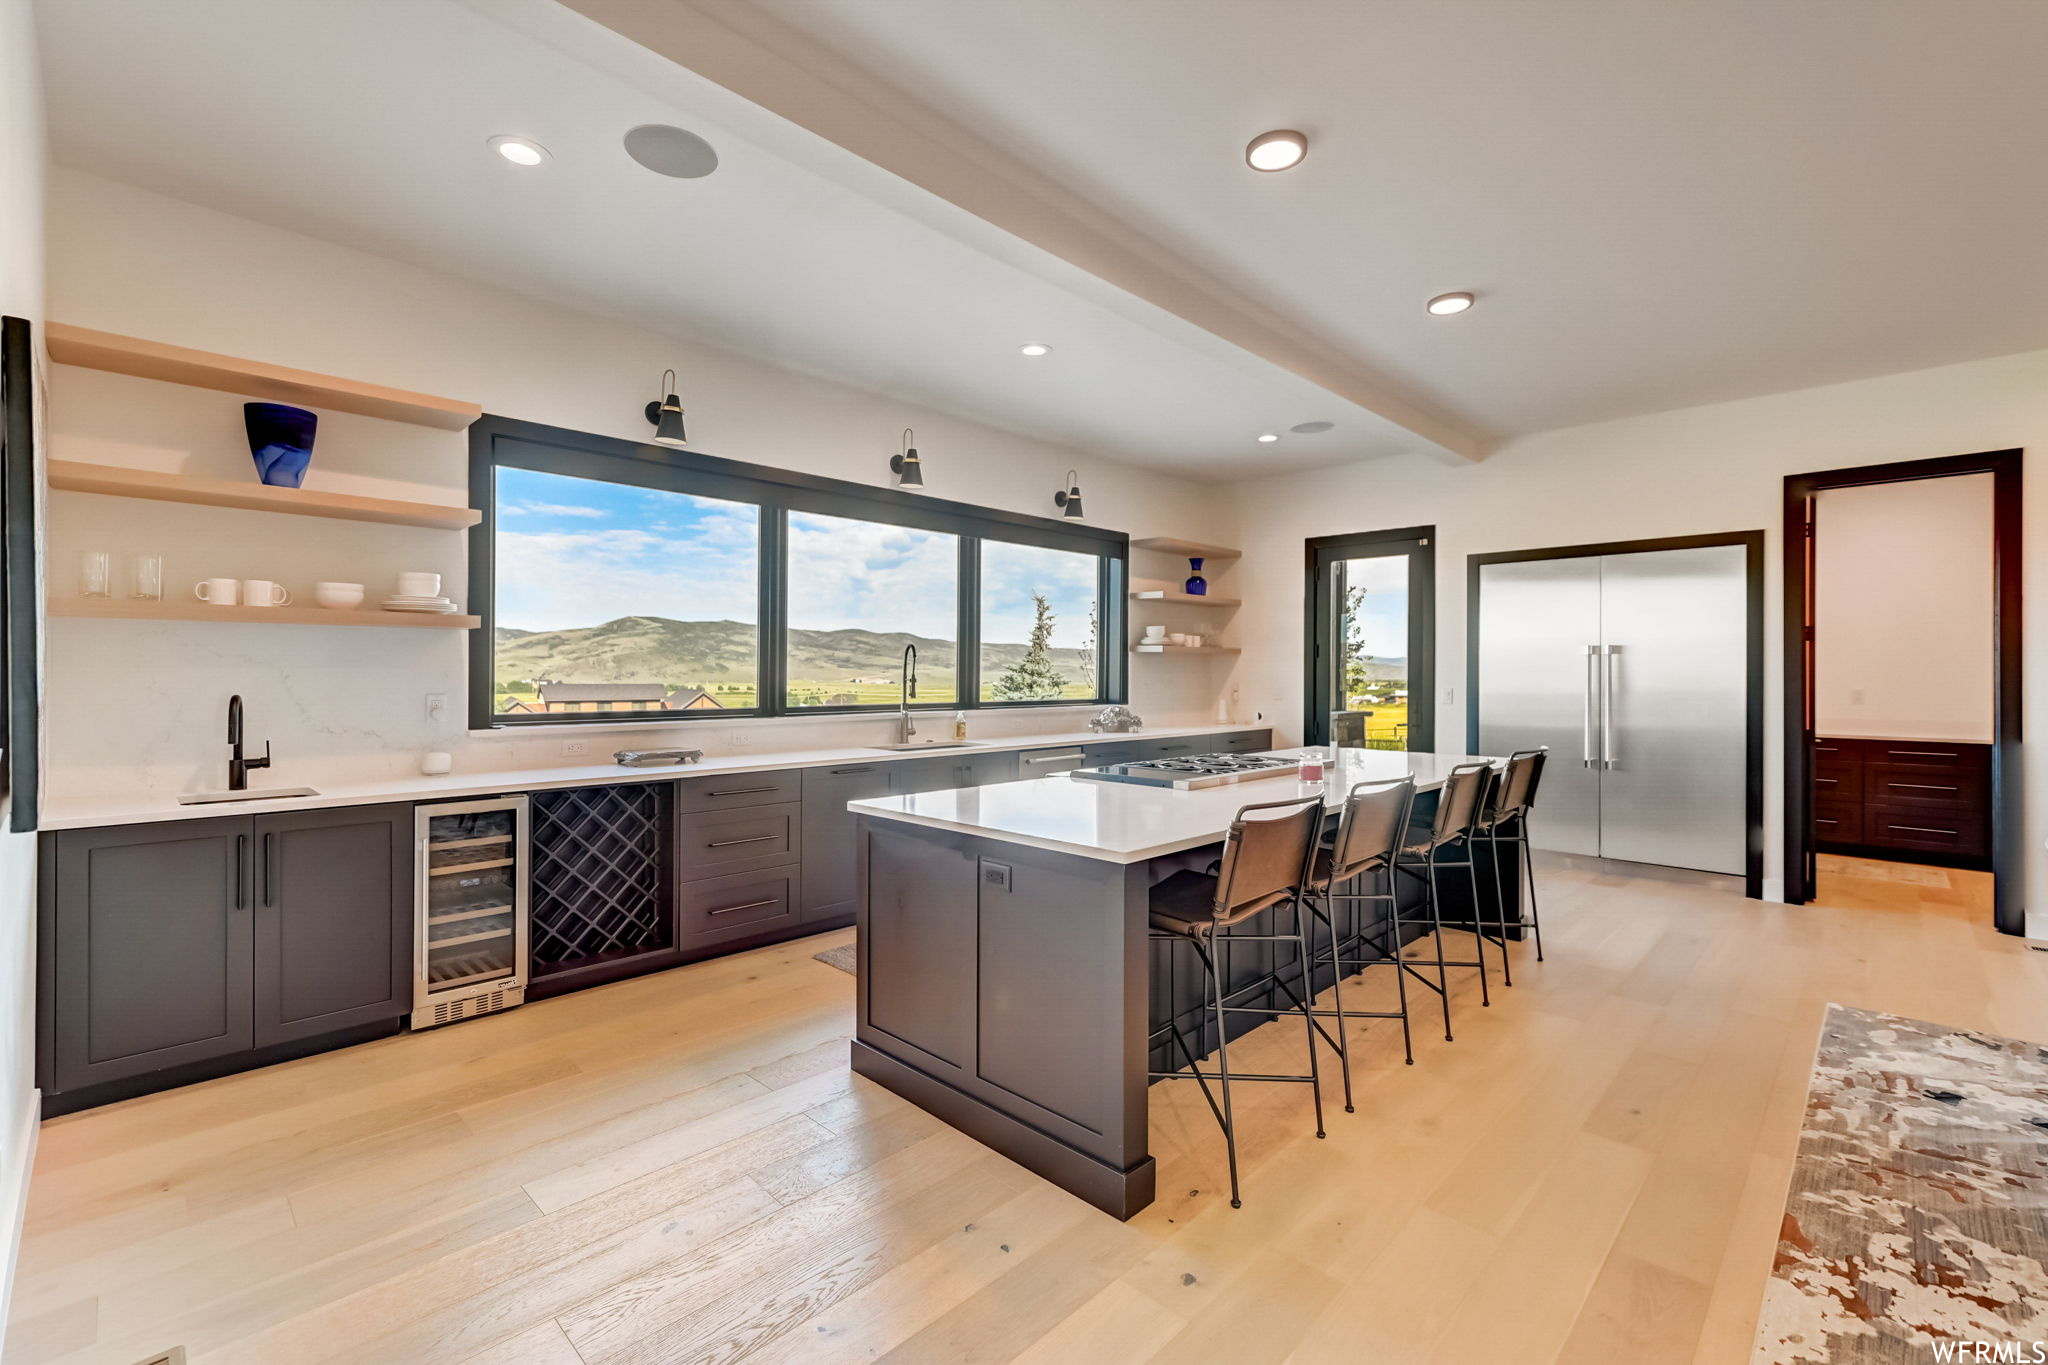 Kitchen with light hardwood / wood-style flooring, a wealth of natural light, and wine cooler